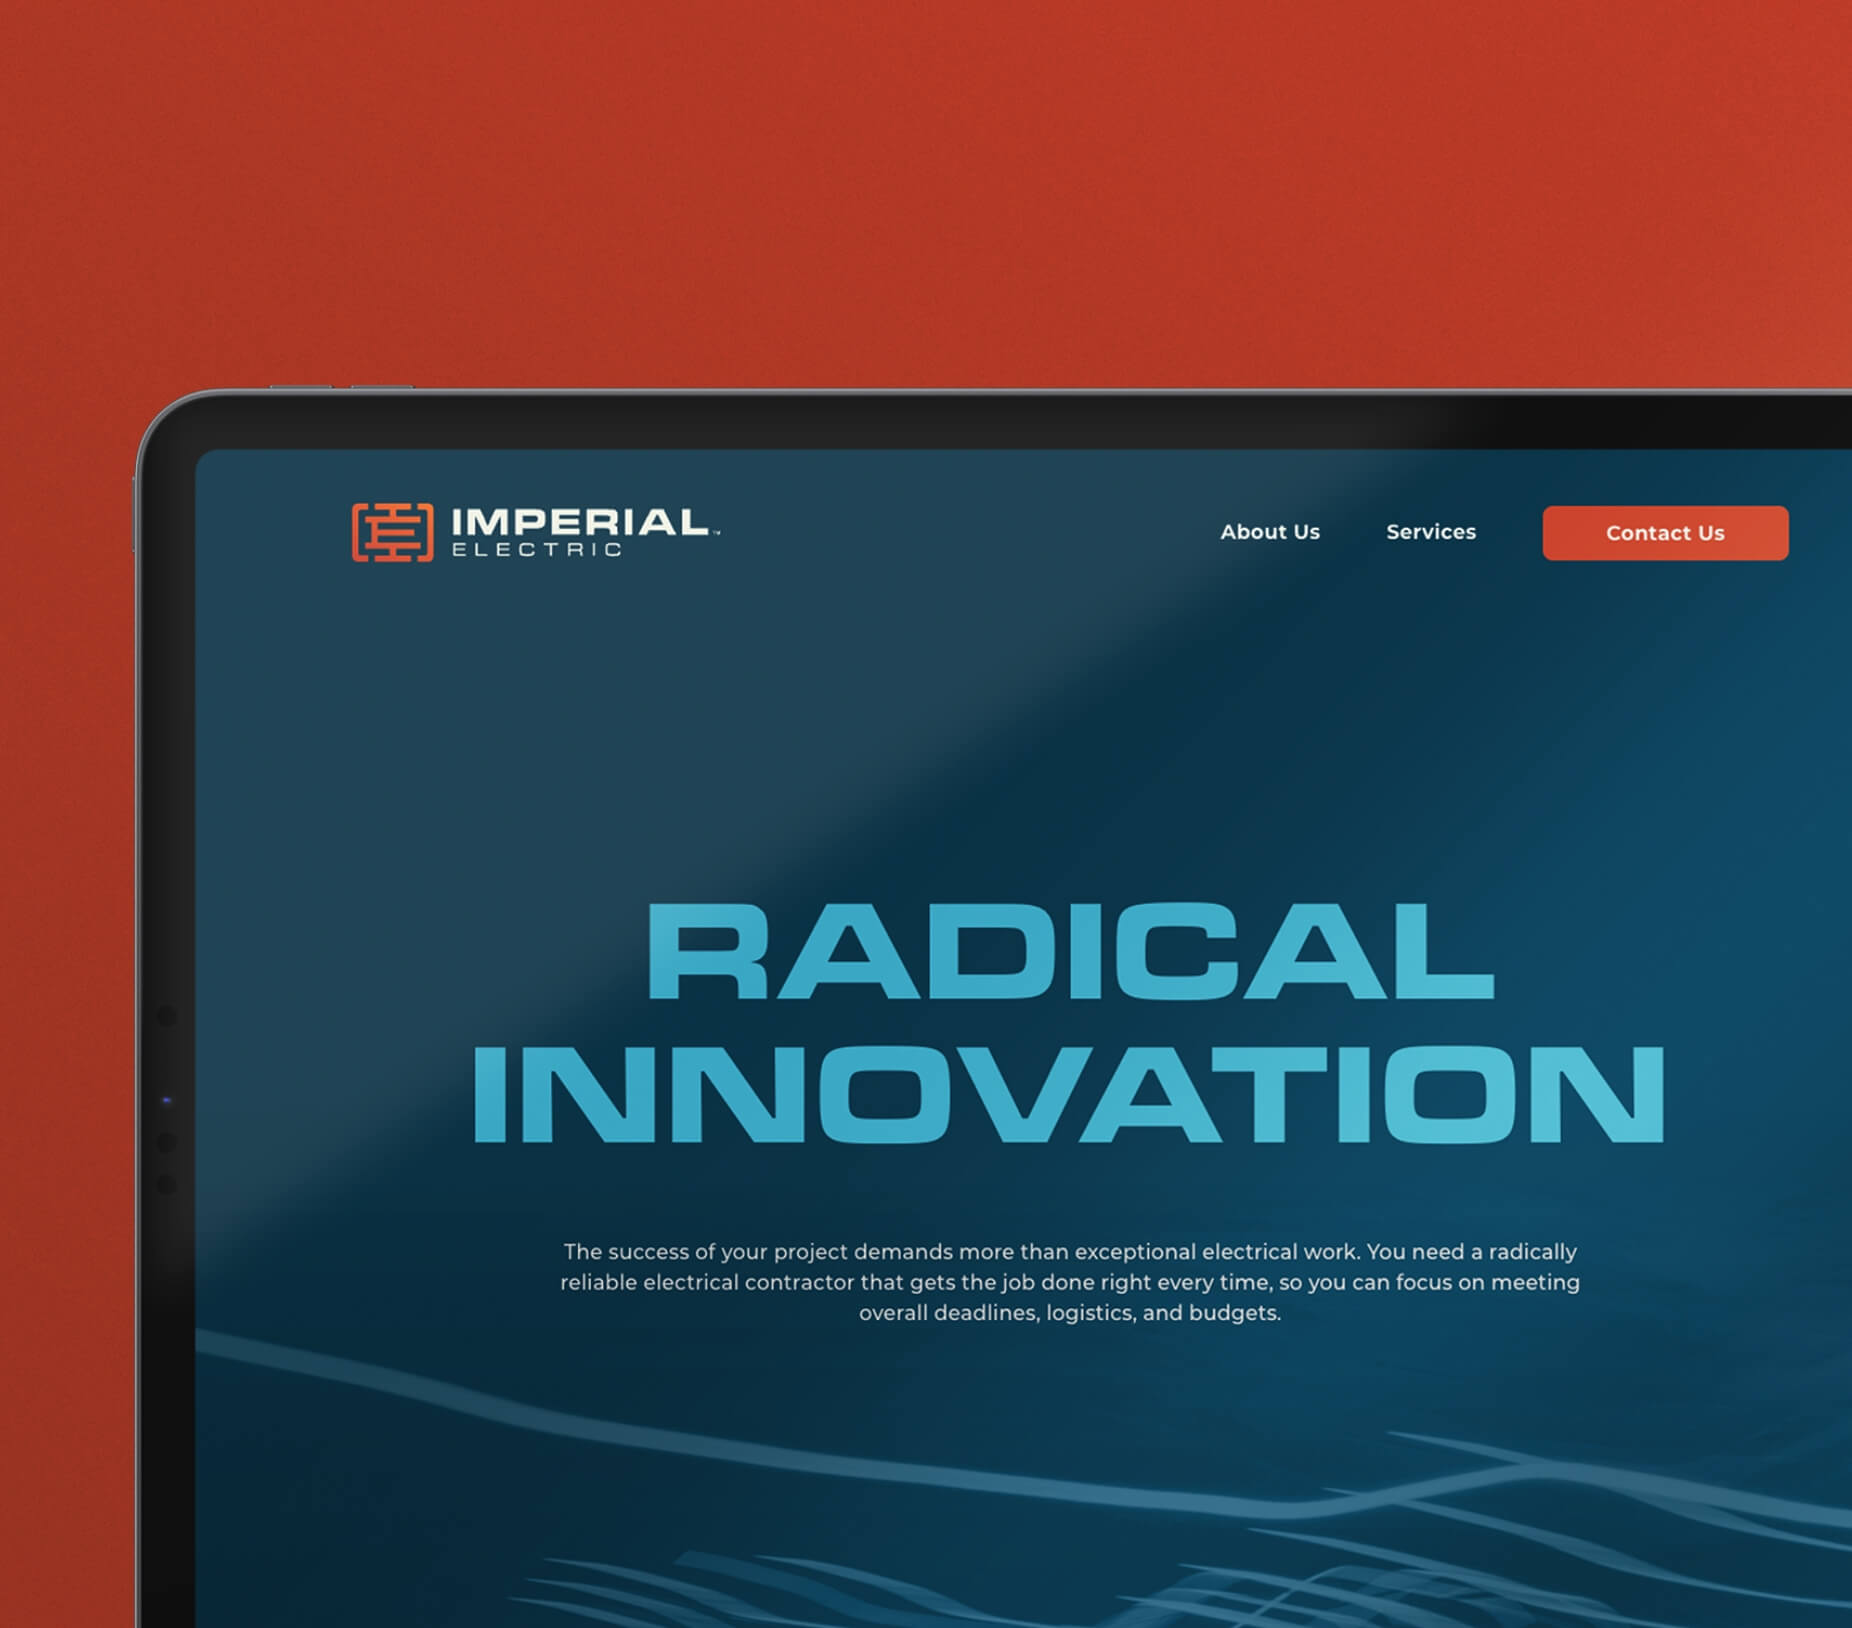 Imperial Electric home page